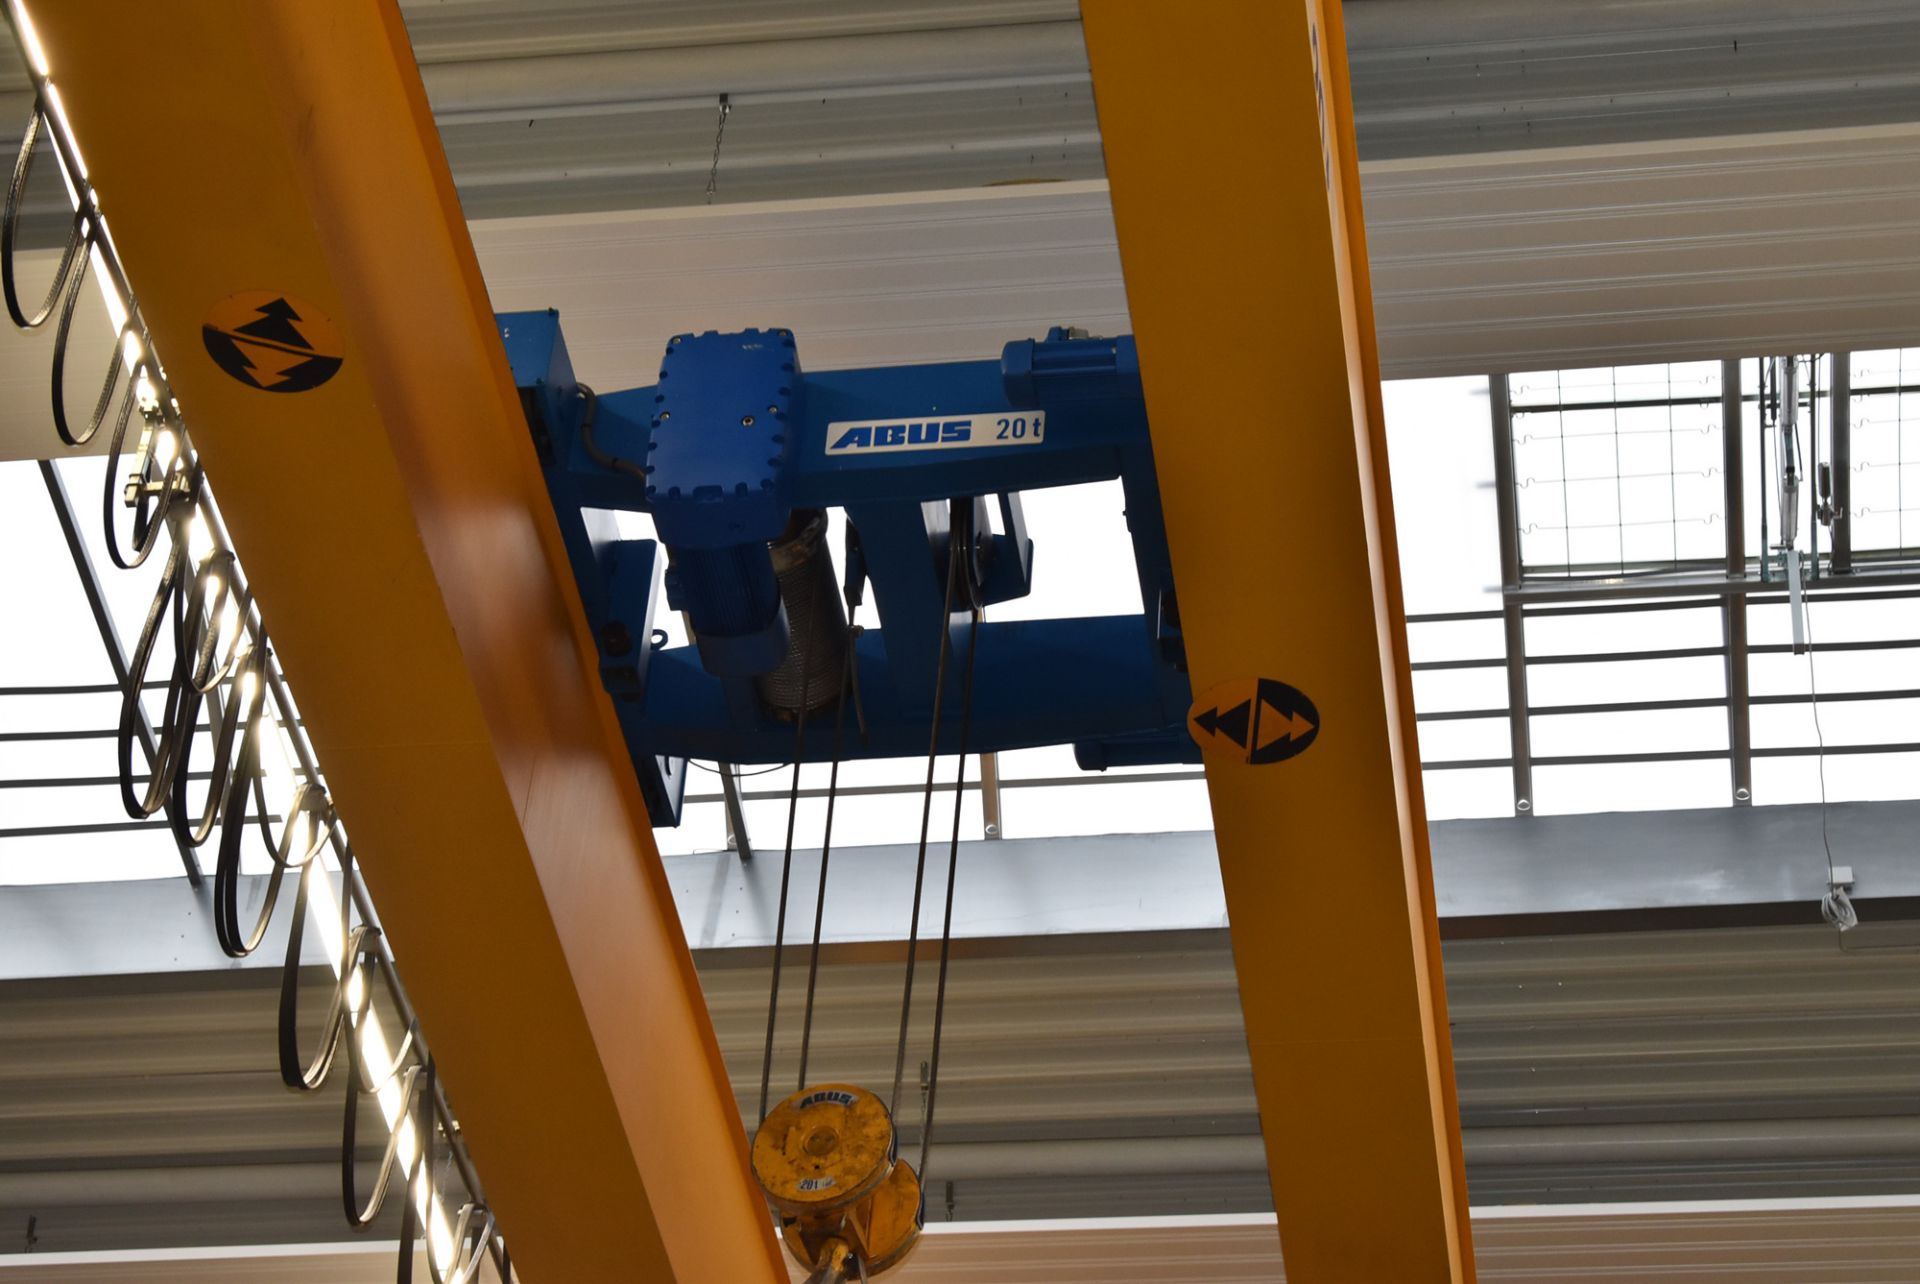 ABUS (2018) 20 TON CAPACITY DOUBLE GIRDER TOP RUNNING OVERHEAD CRANE WITH 24.75 M SPAN, 9.5 M HEIGHT - Image 10 of 10